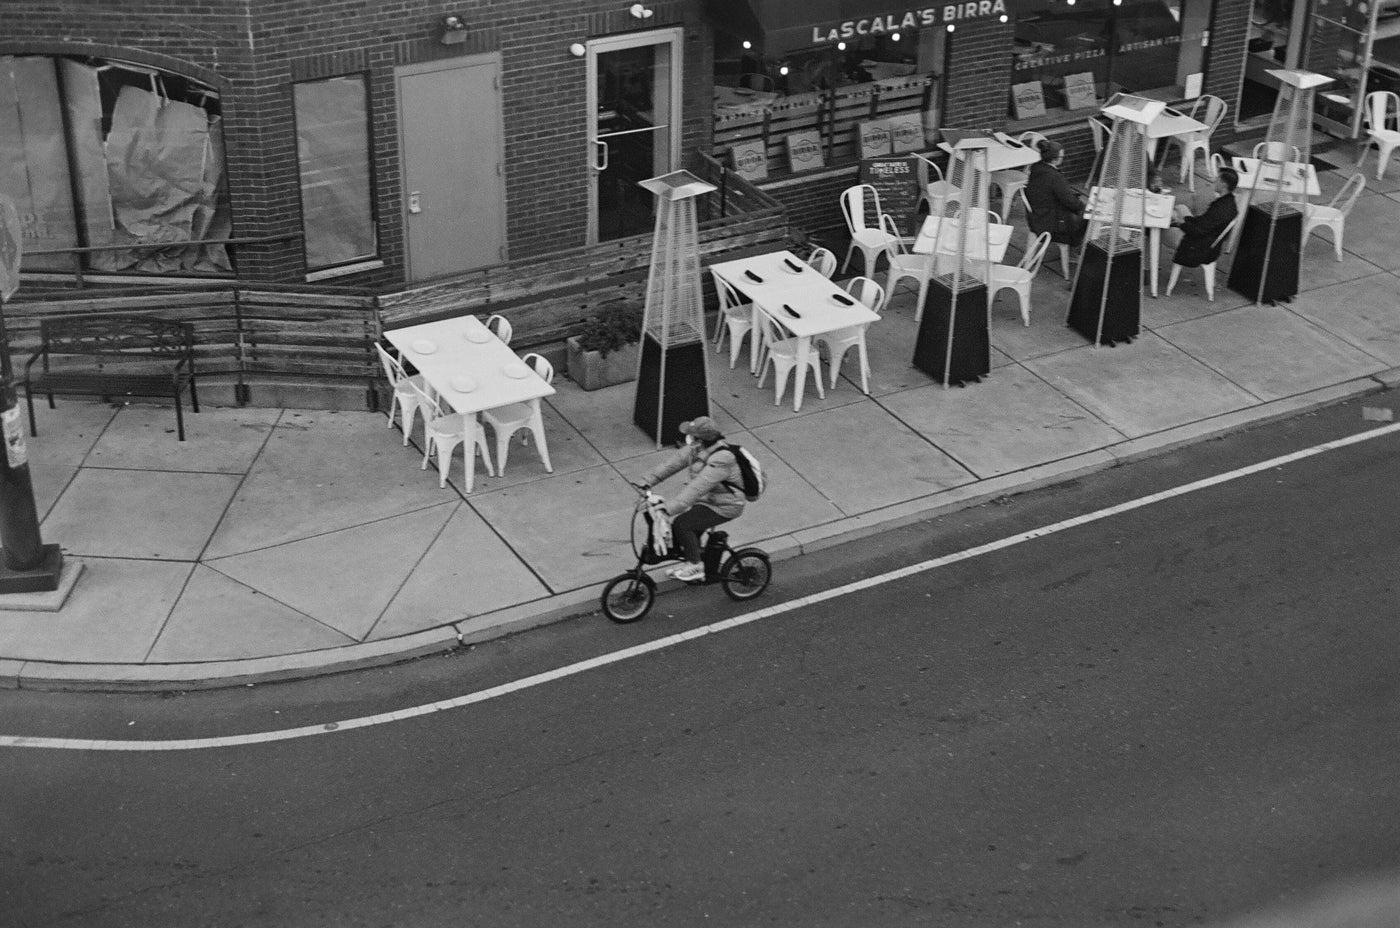 Photograph of person riding their bike in an empty street